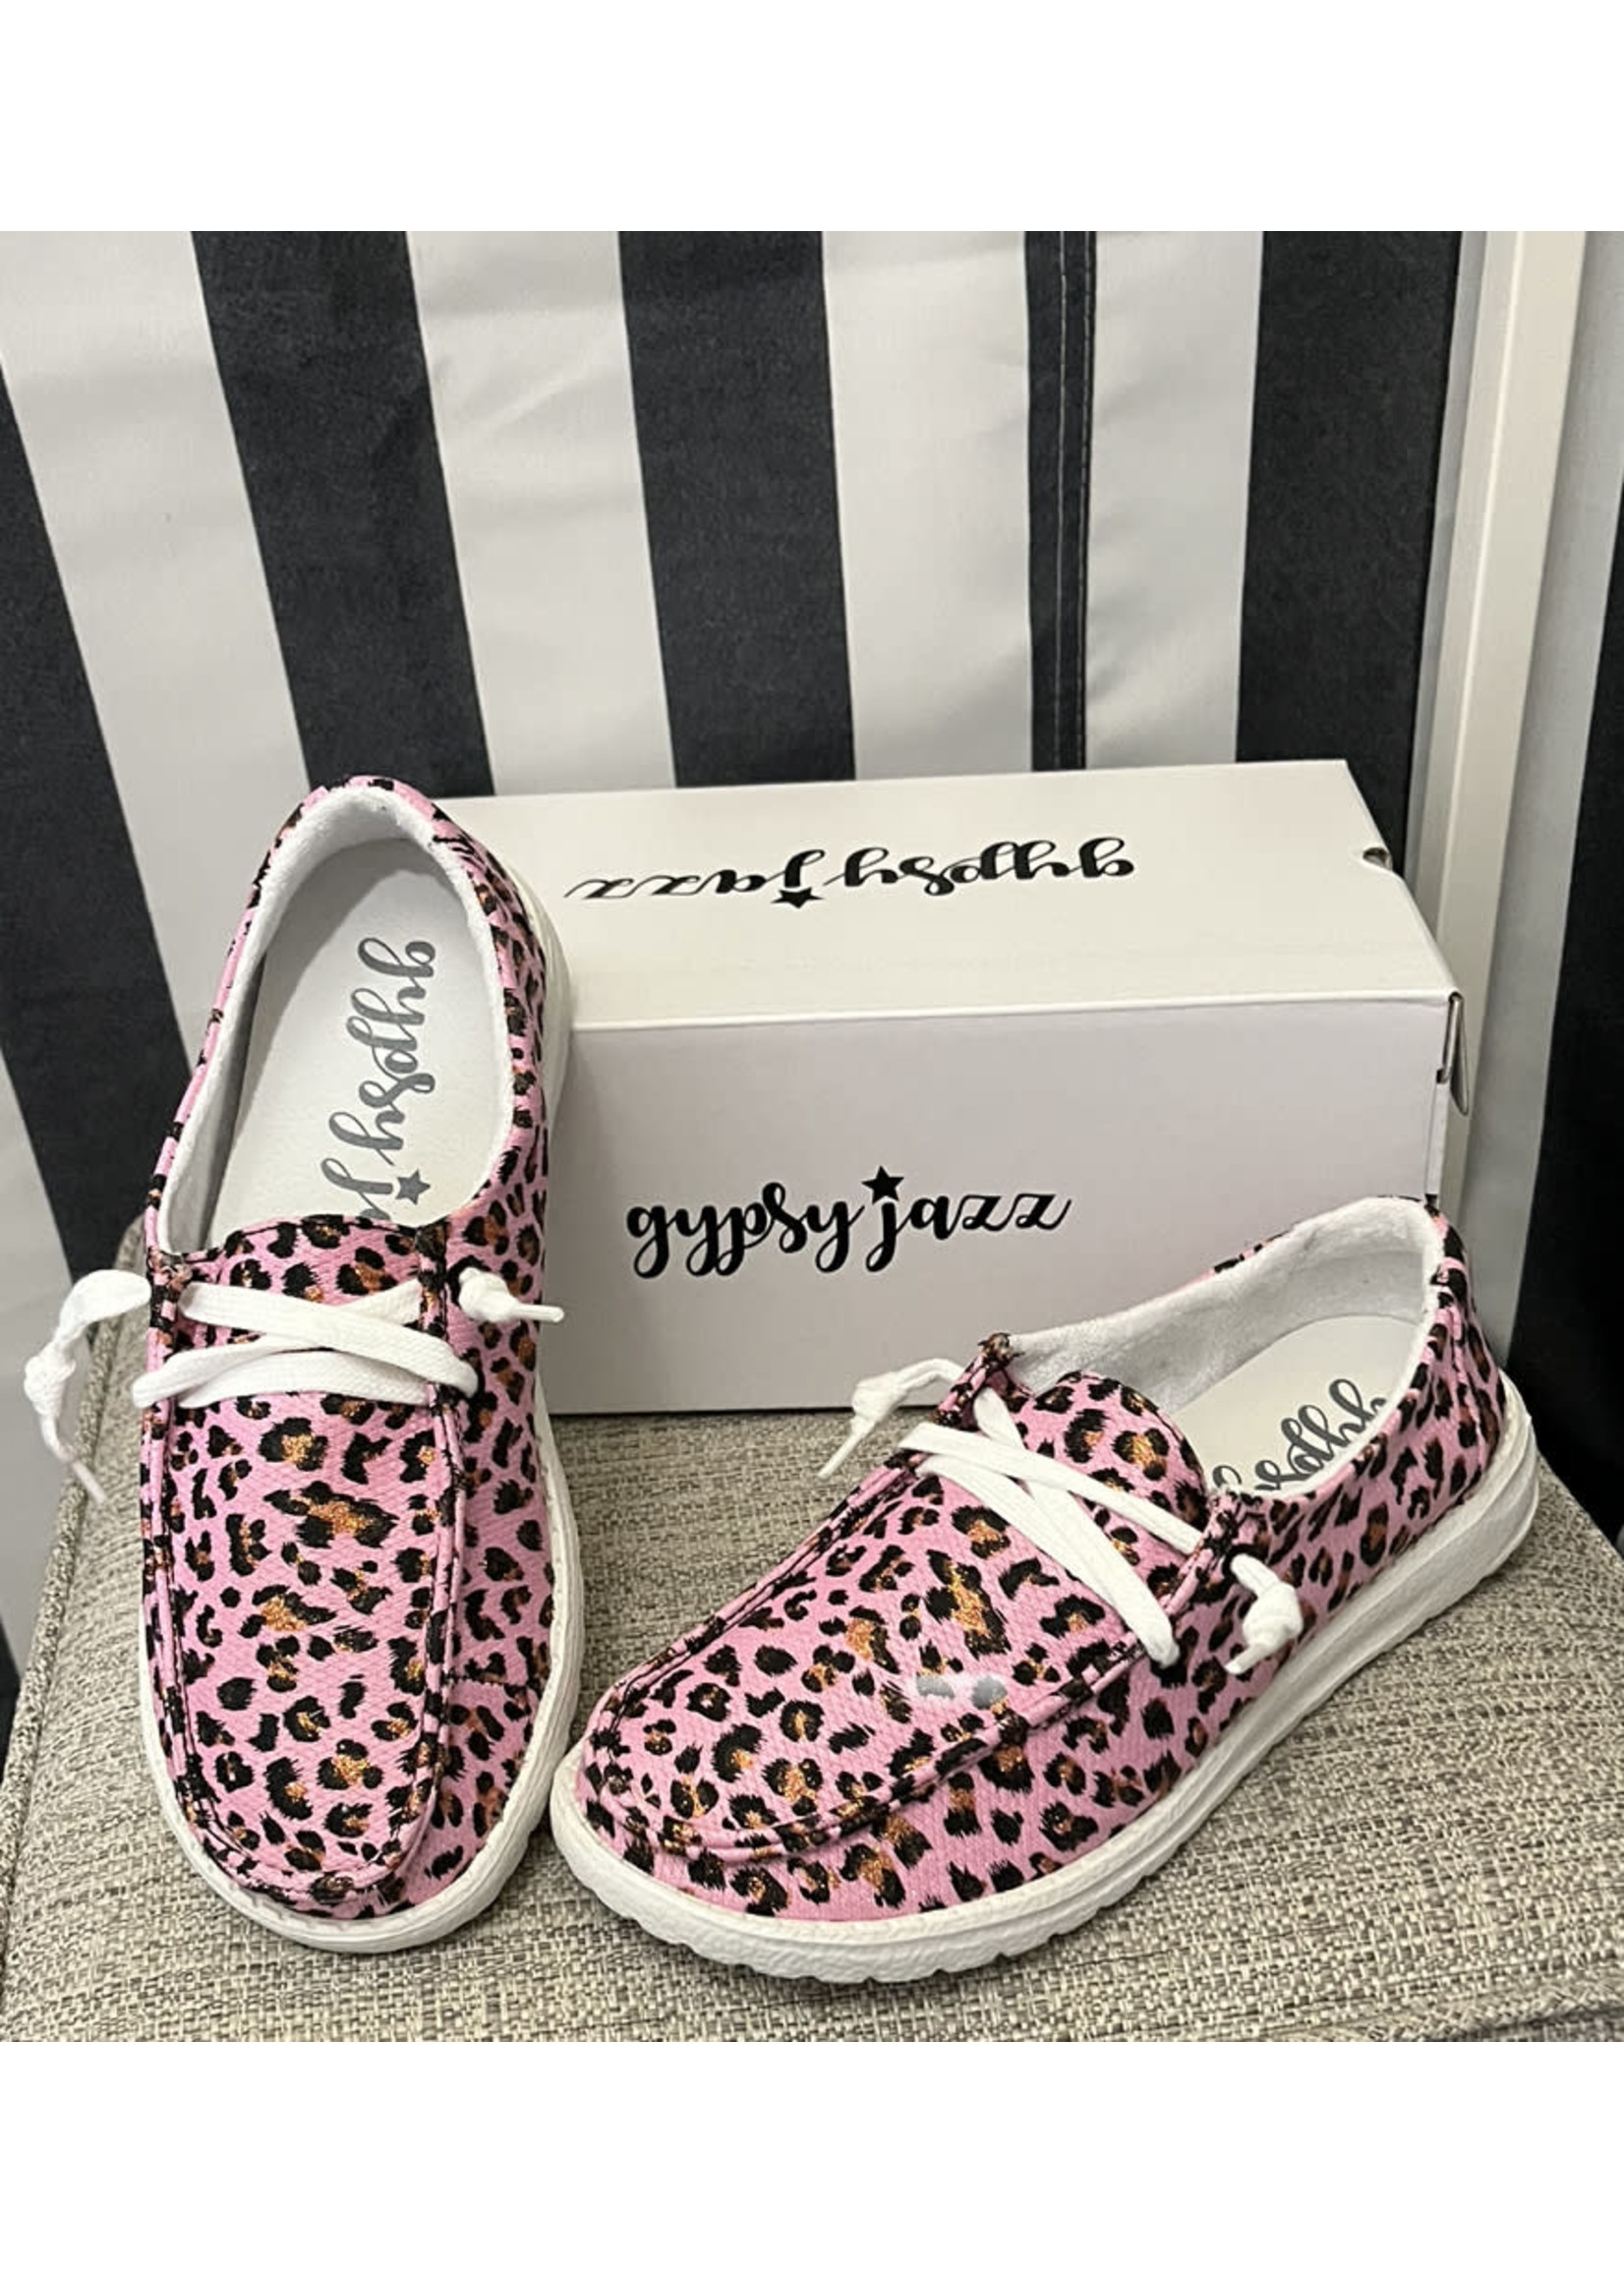 Pink/leopard Shoes Very G Gia